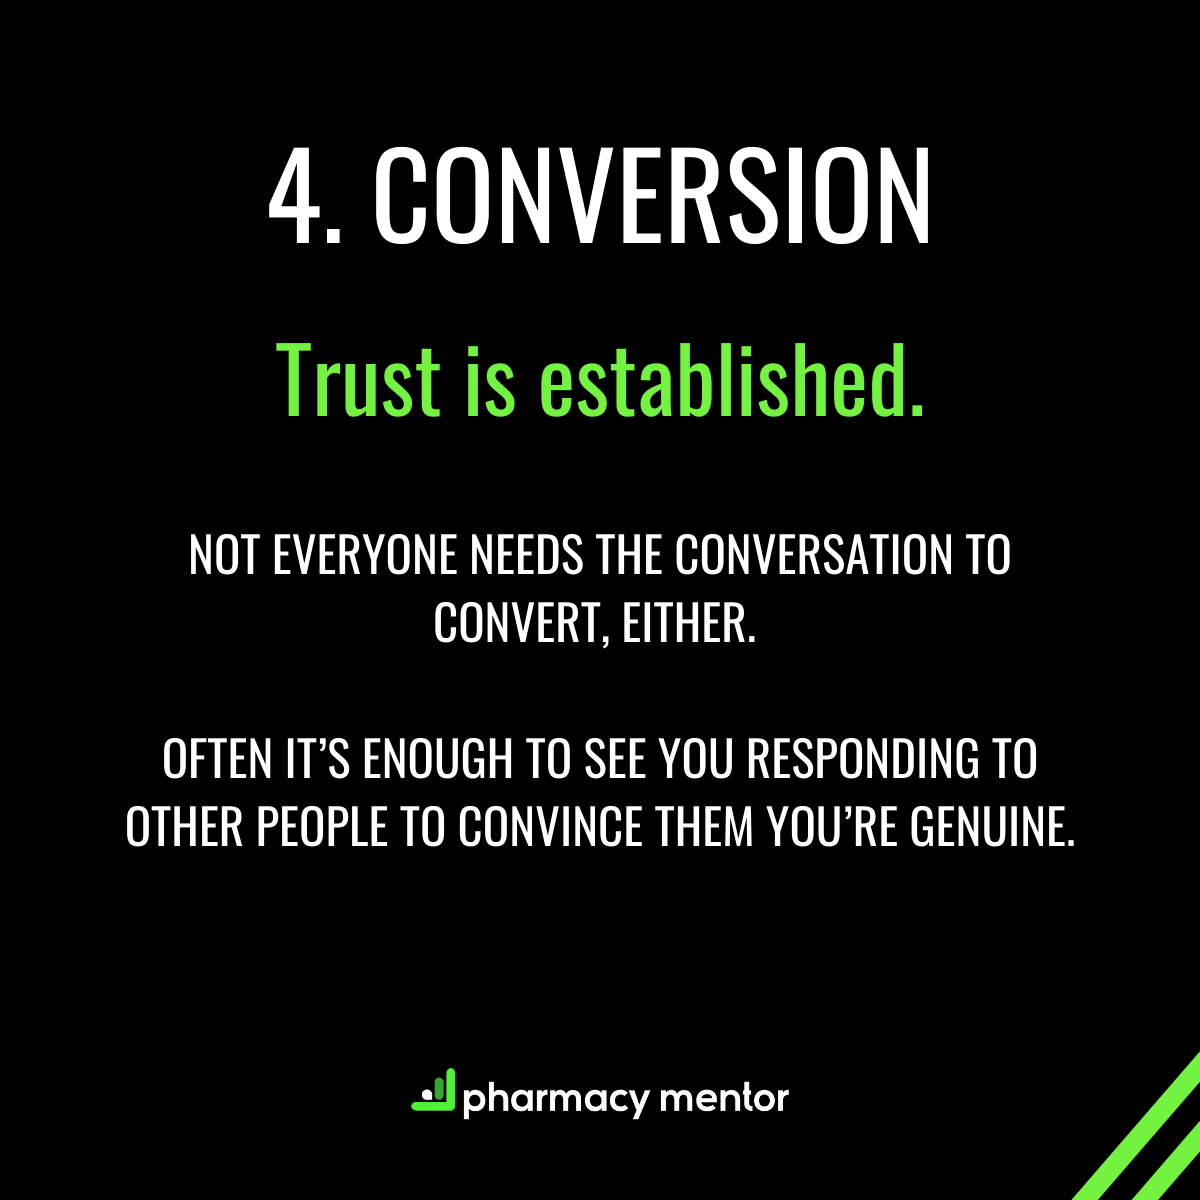 4. Conversion. Trust is established. Not everyone needs the conversation to convert, either. Often it’s enough to see you responding to other people to convince them you’re genuine